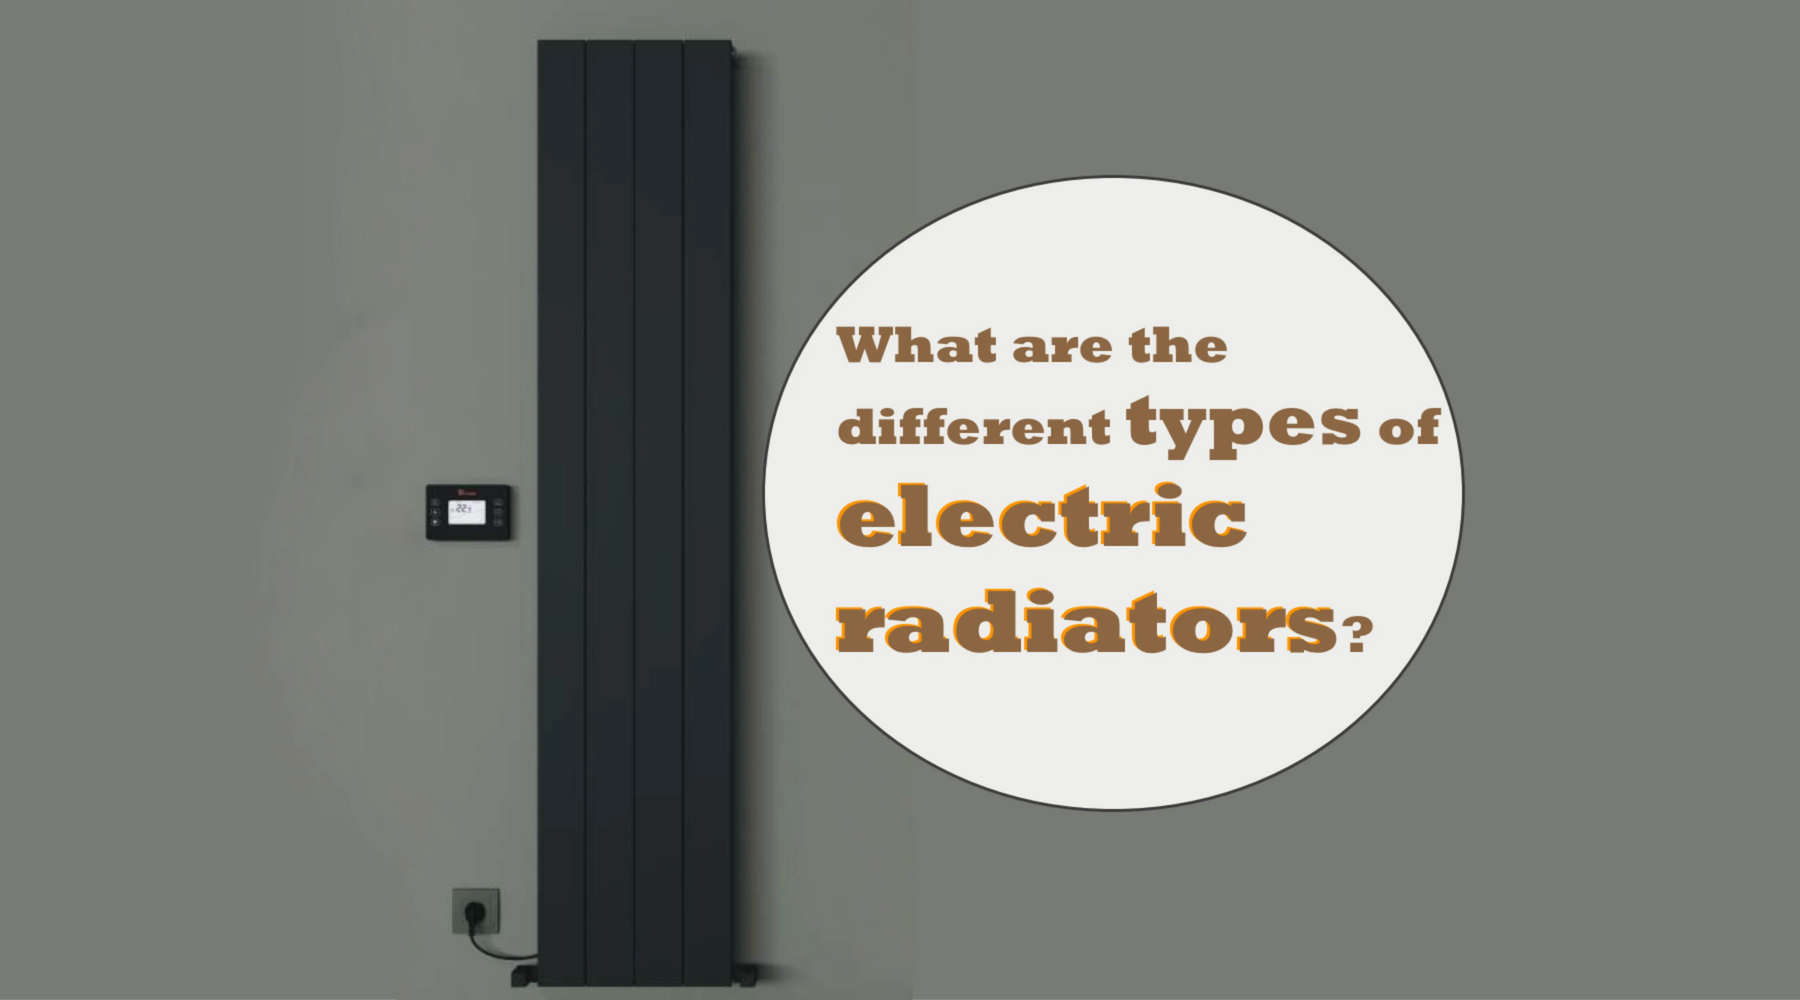 What are the different types of electric radiators?